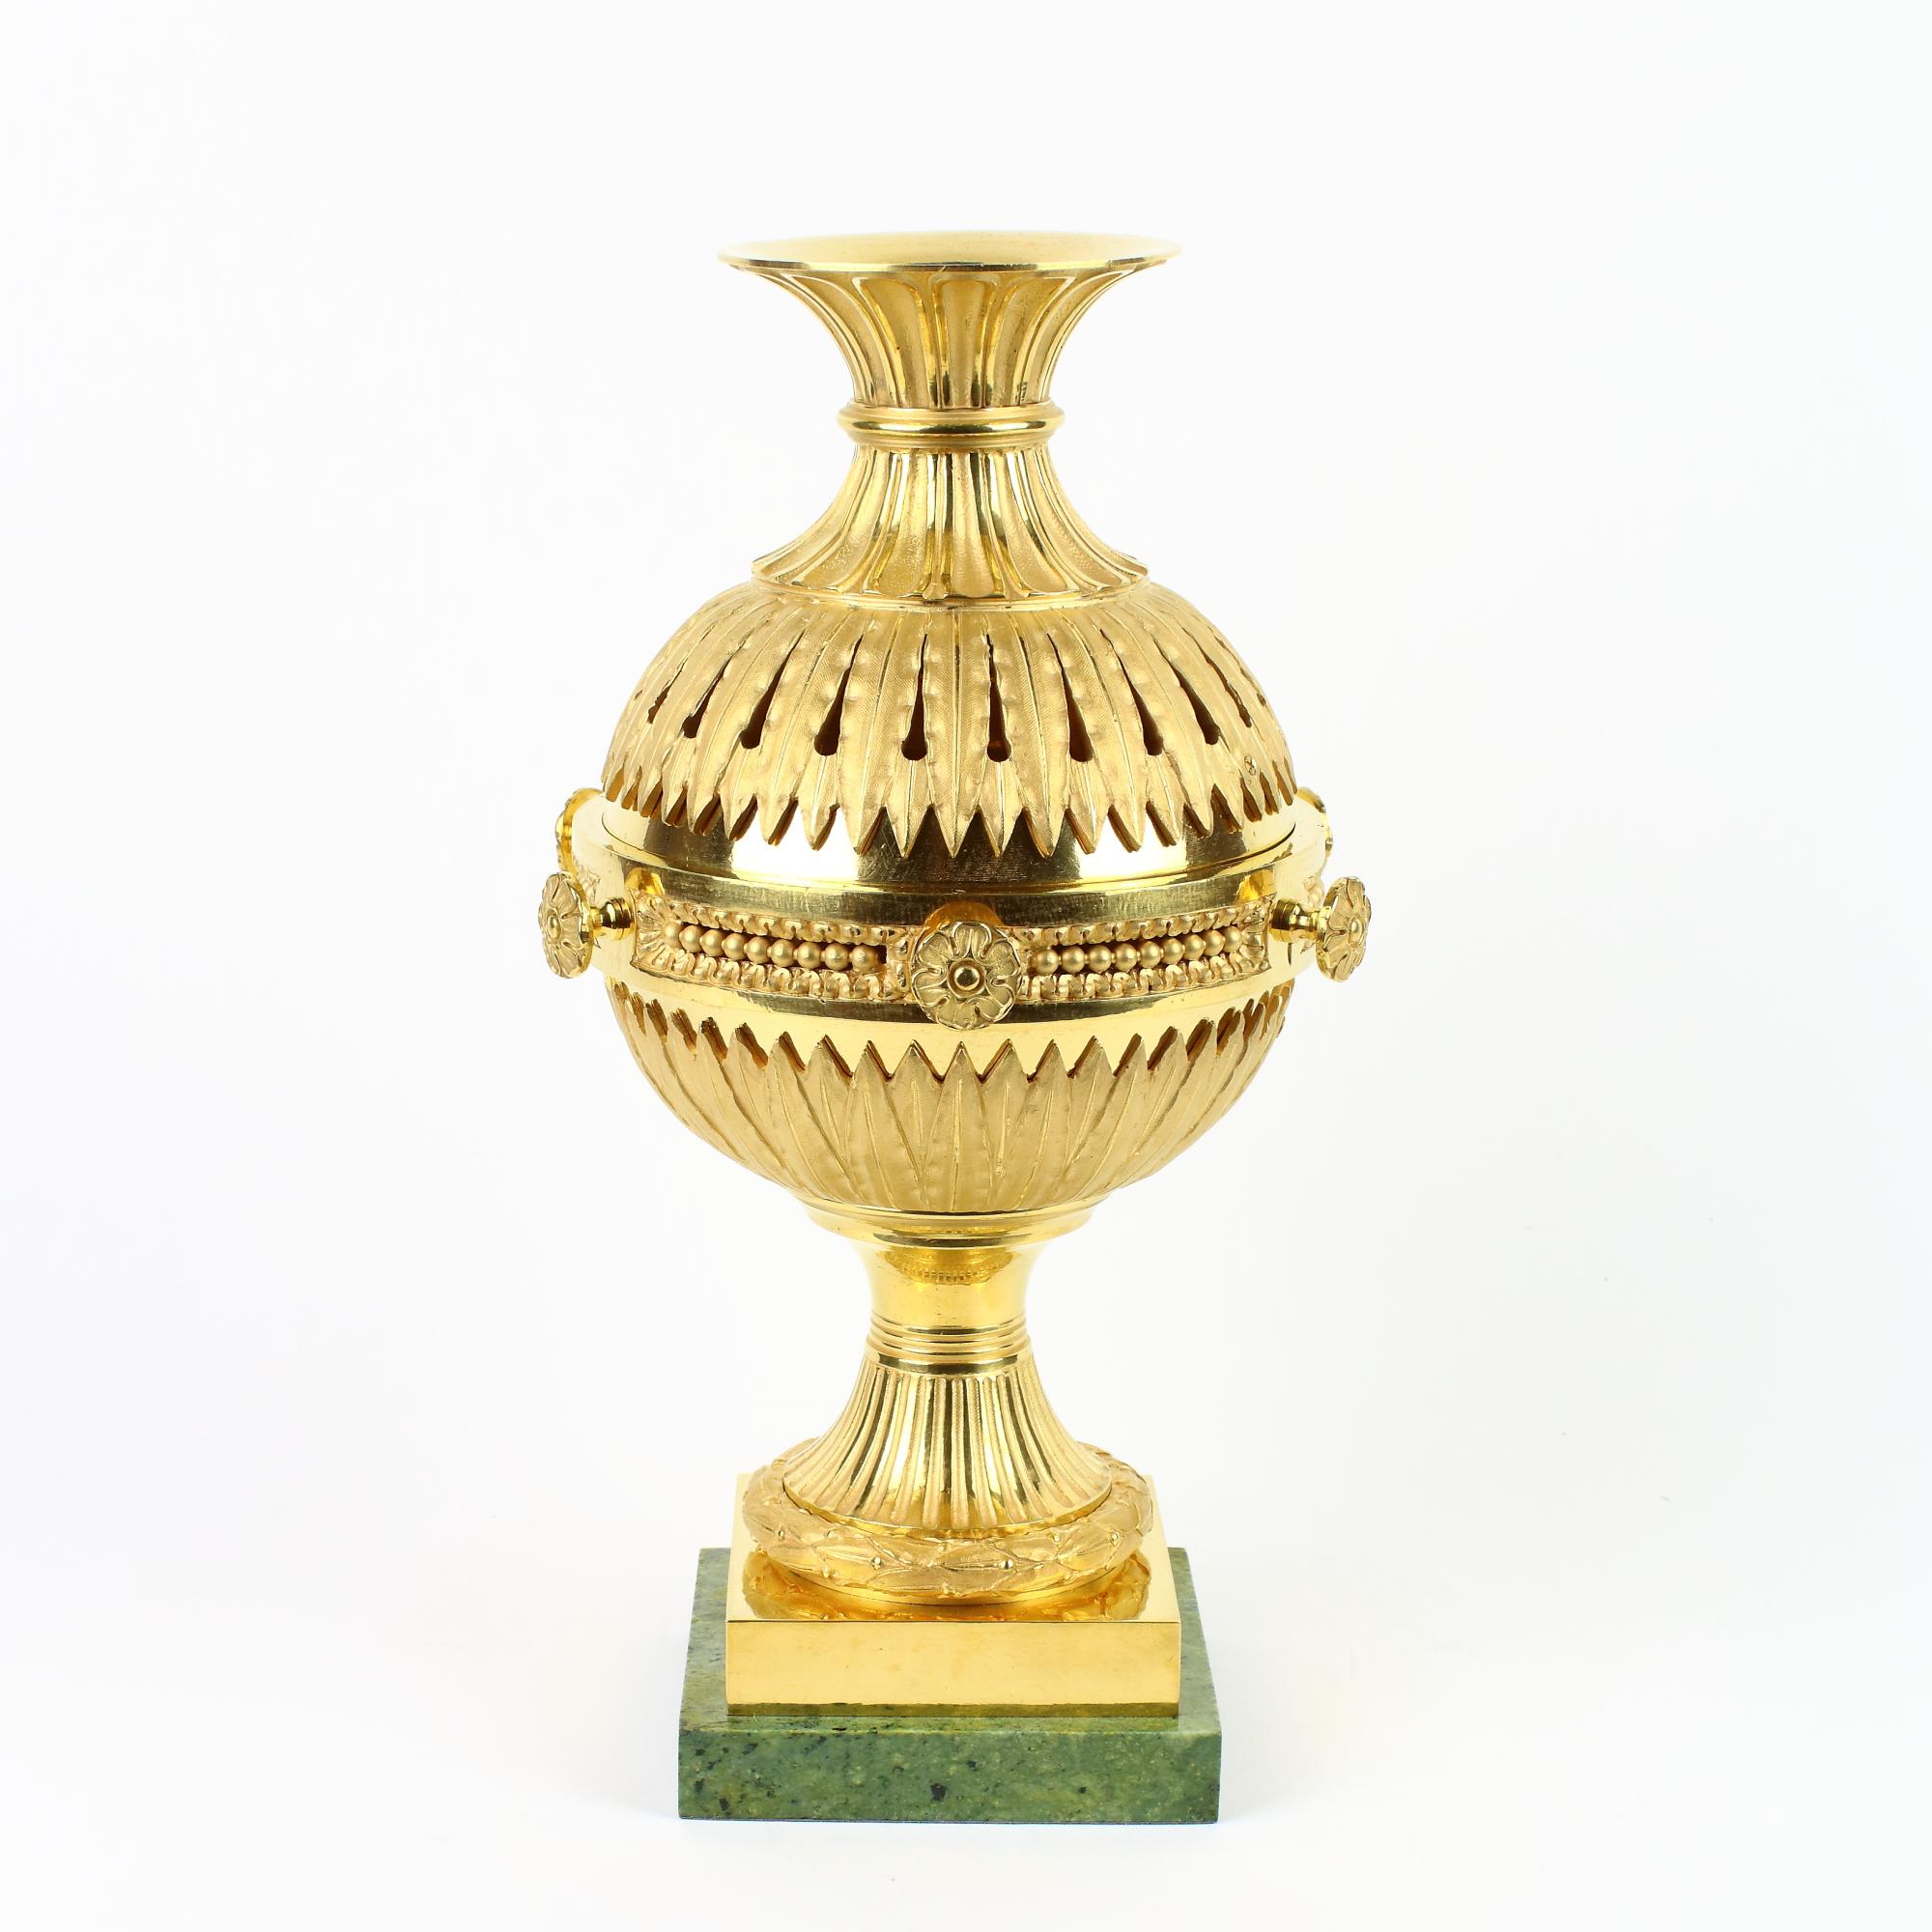 French Late 18thh Century Louis XVI Gilt Bronze Incense Burner or Brule Parfum In Good Condition For Sale In Berlin, DE